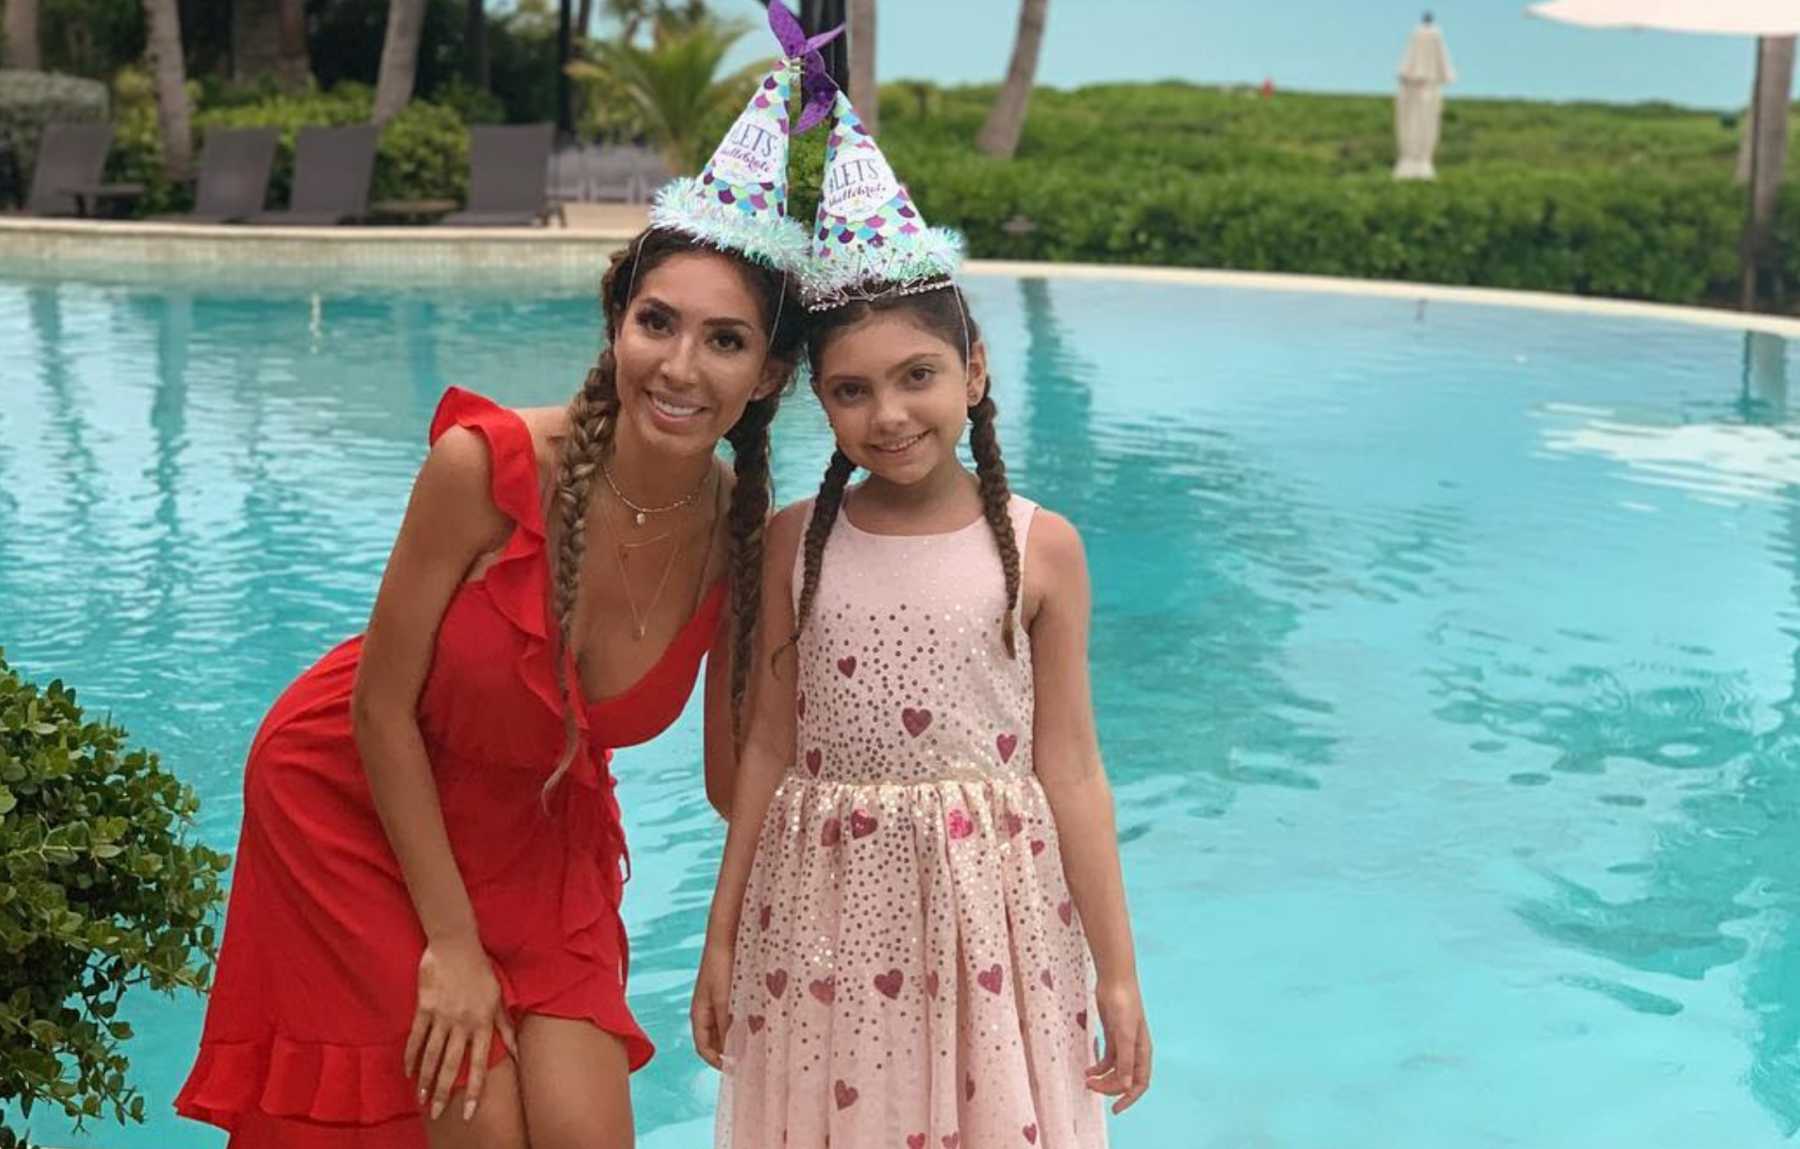 Farrah Abraham Defends Her Decision To Let Her Daughter Pierce Her ...